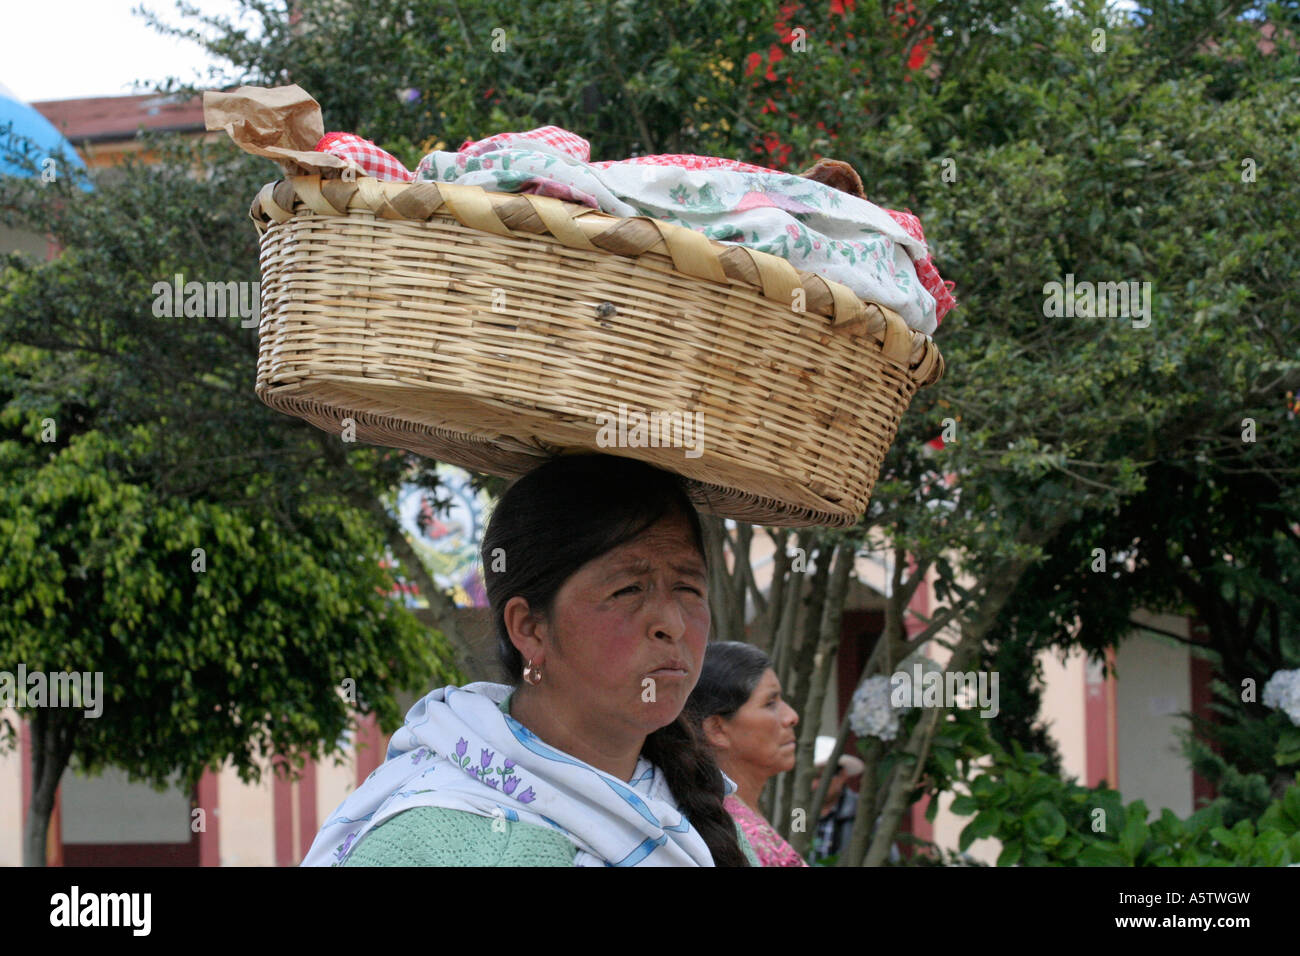 Painet jj1557 guatemala street seller carrying food head san pedro sacatepequez latin america central americas labor labour Stock Photo